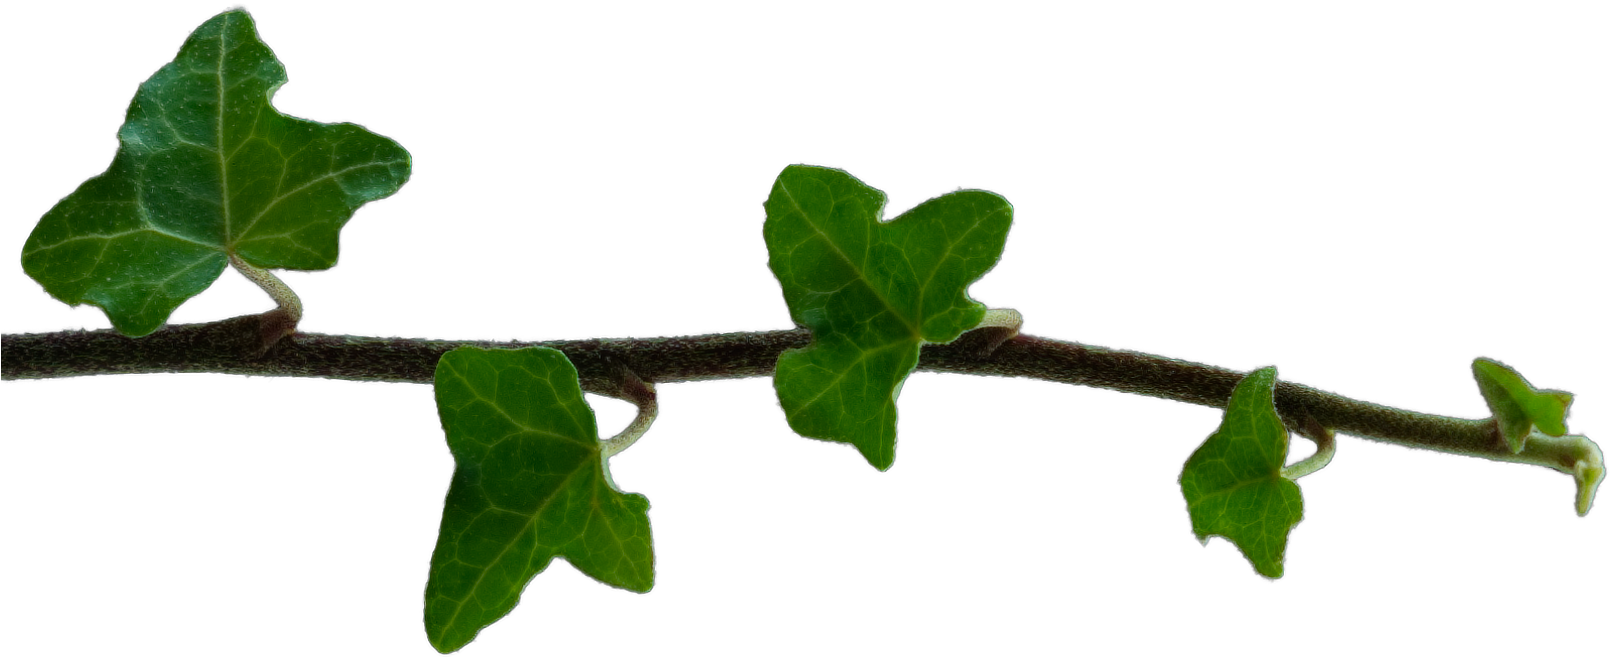 Just The Isolated Branch With A Transparent Background - Oregon White Oak (1610x711)